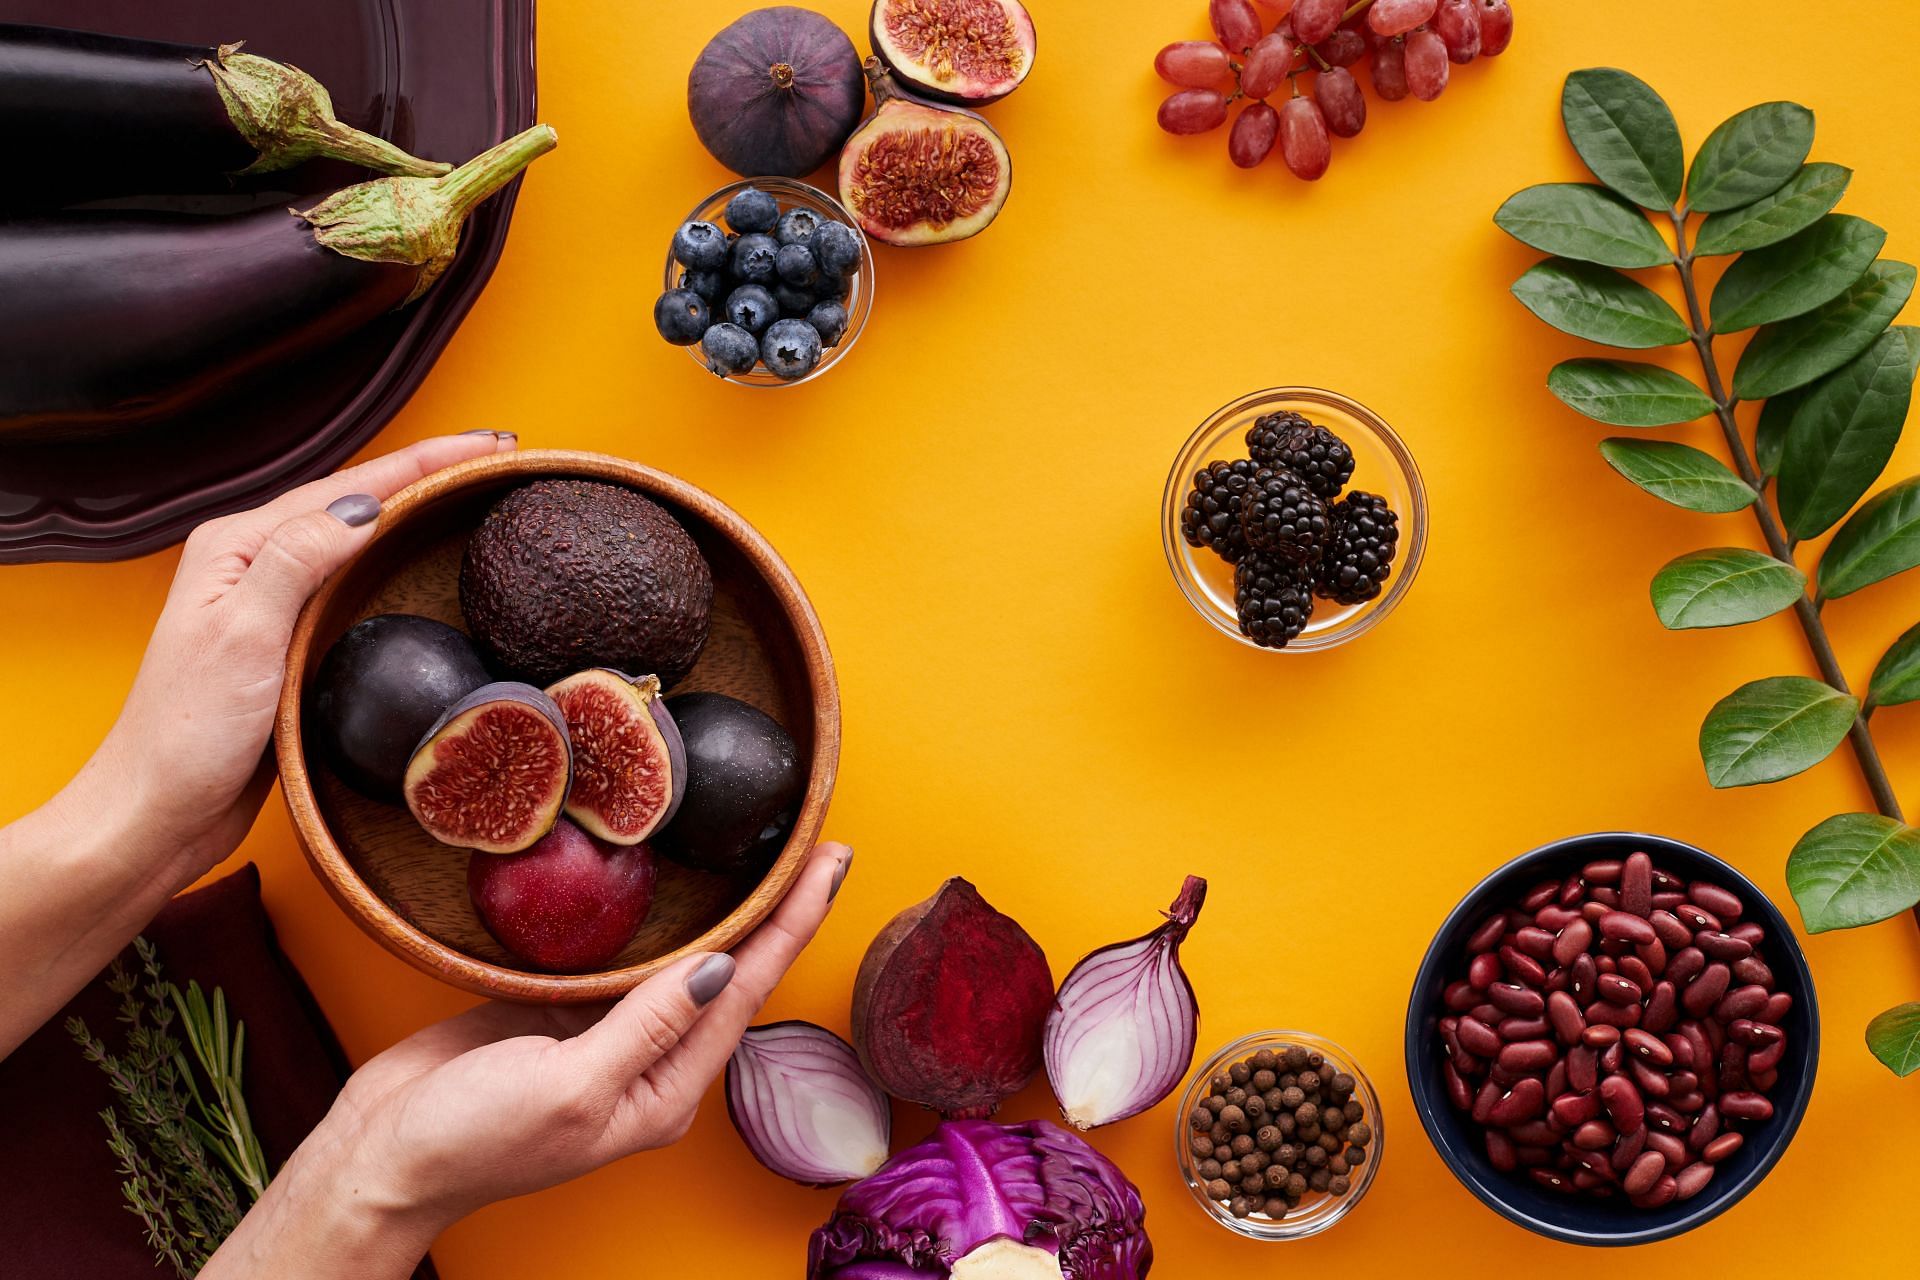 There are several benefits of prune juice for your health. (Image via Pexels/ Vanessa Loring)